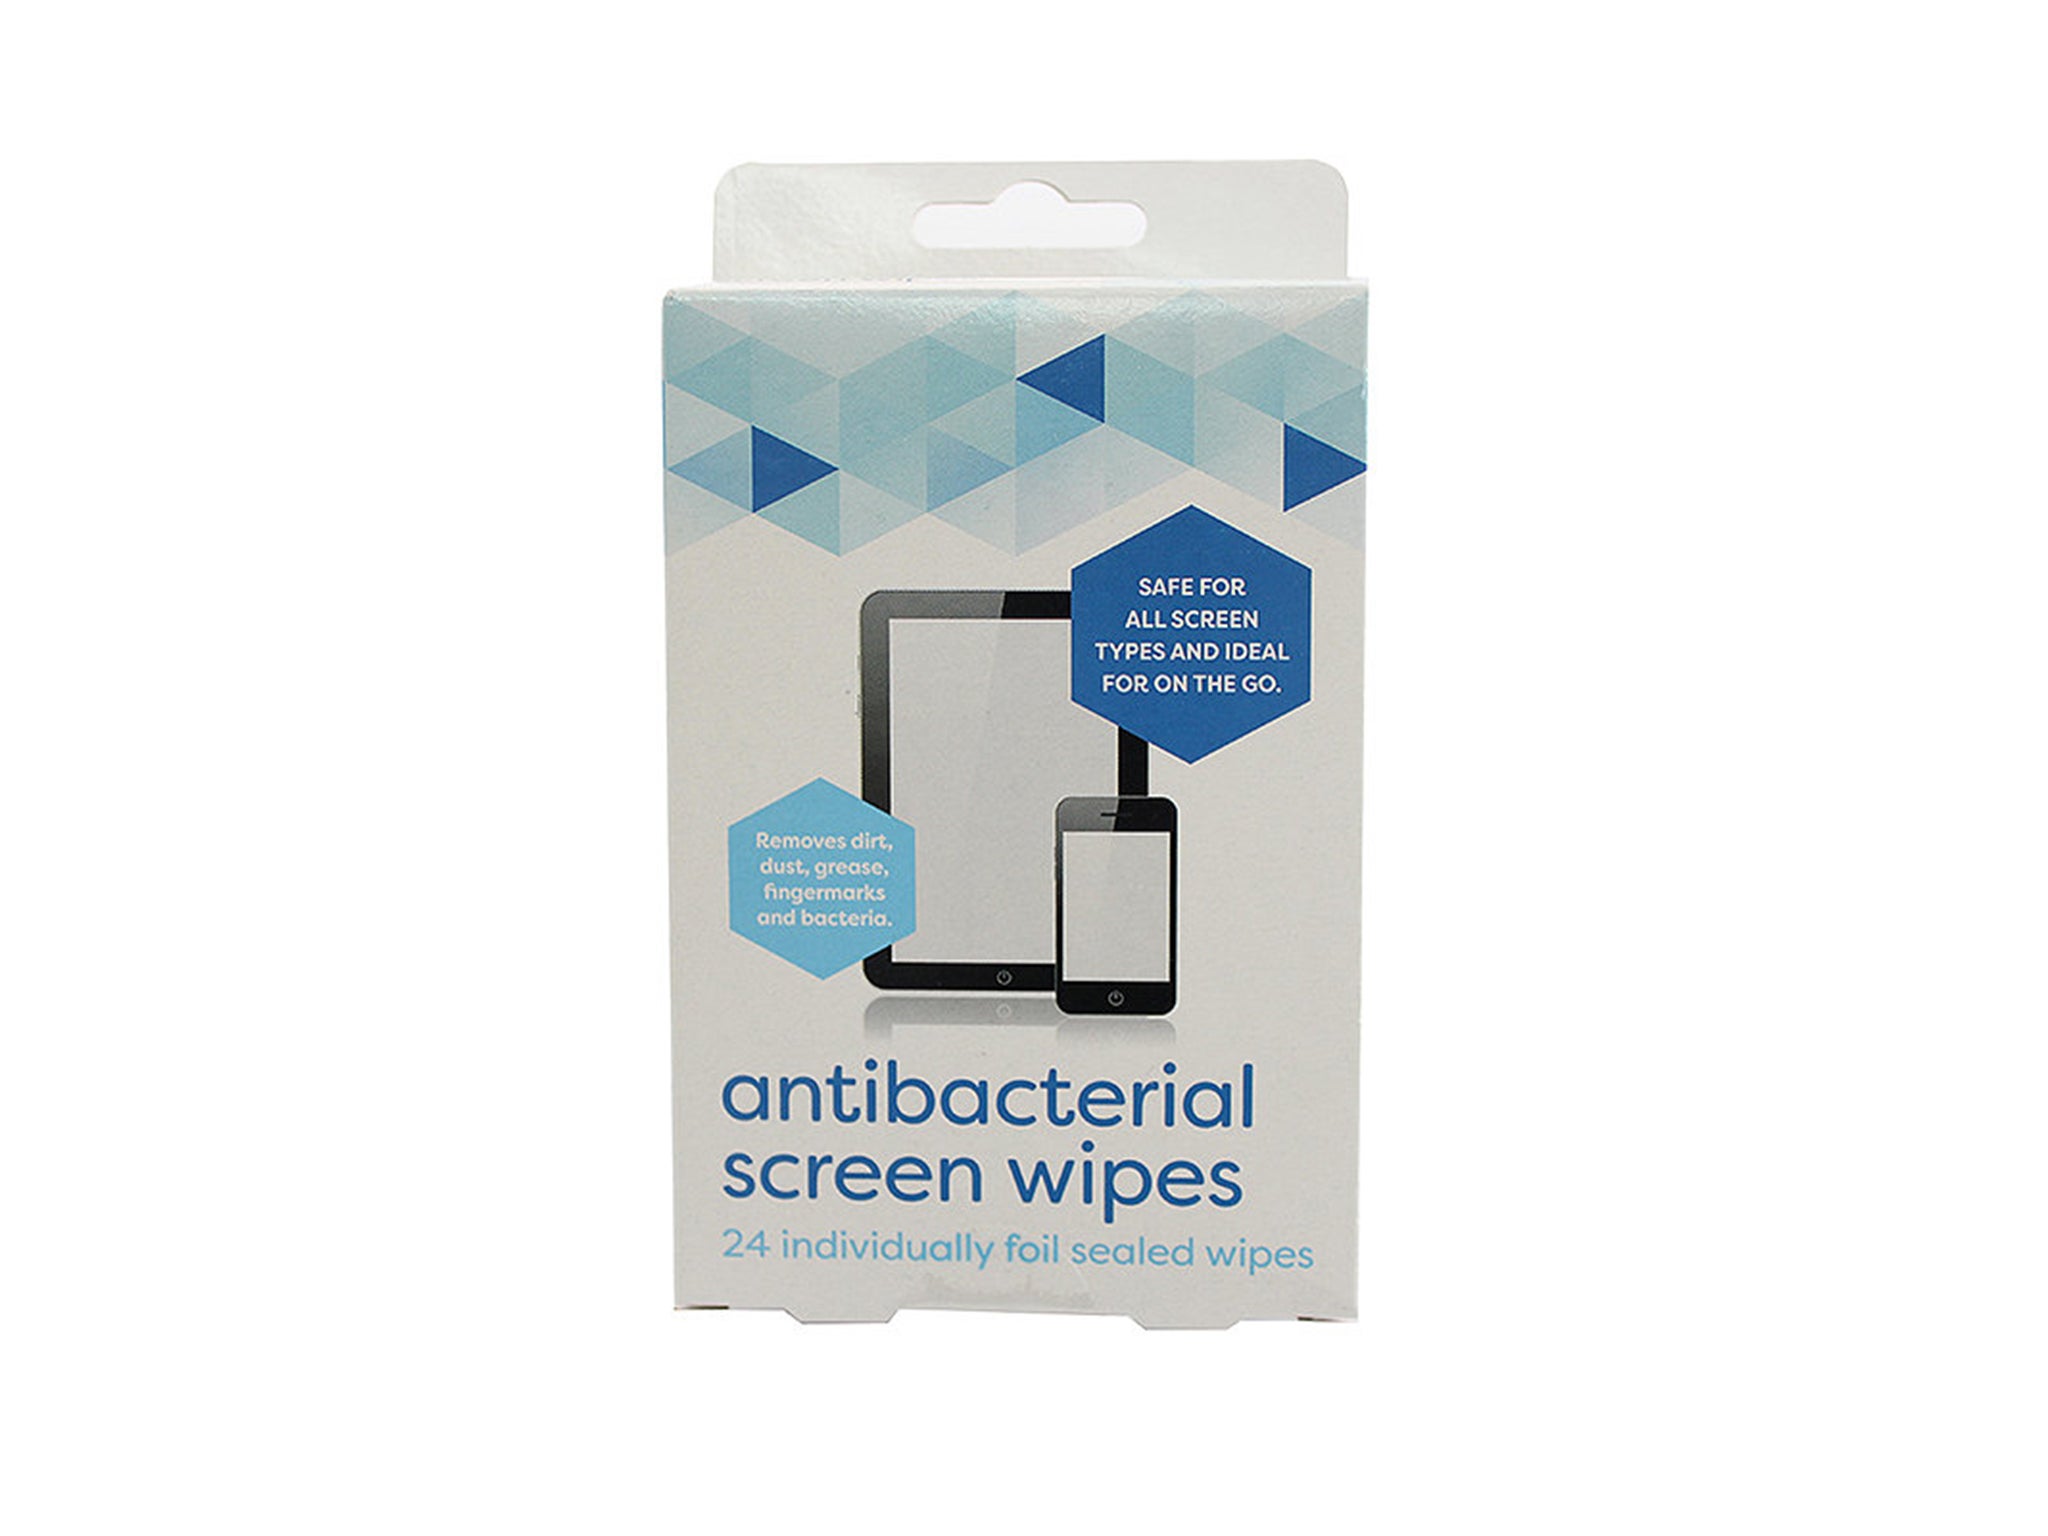 These wipes won't leave any smear marks once you've used them on computer screens